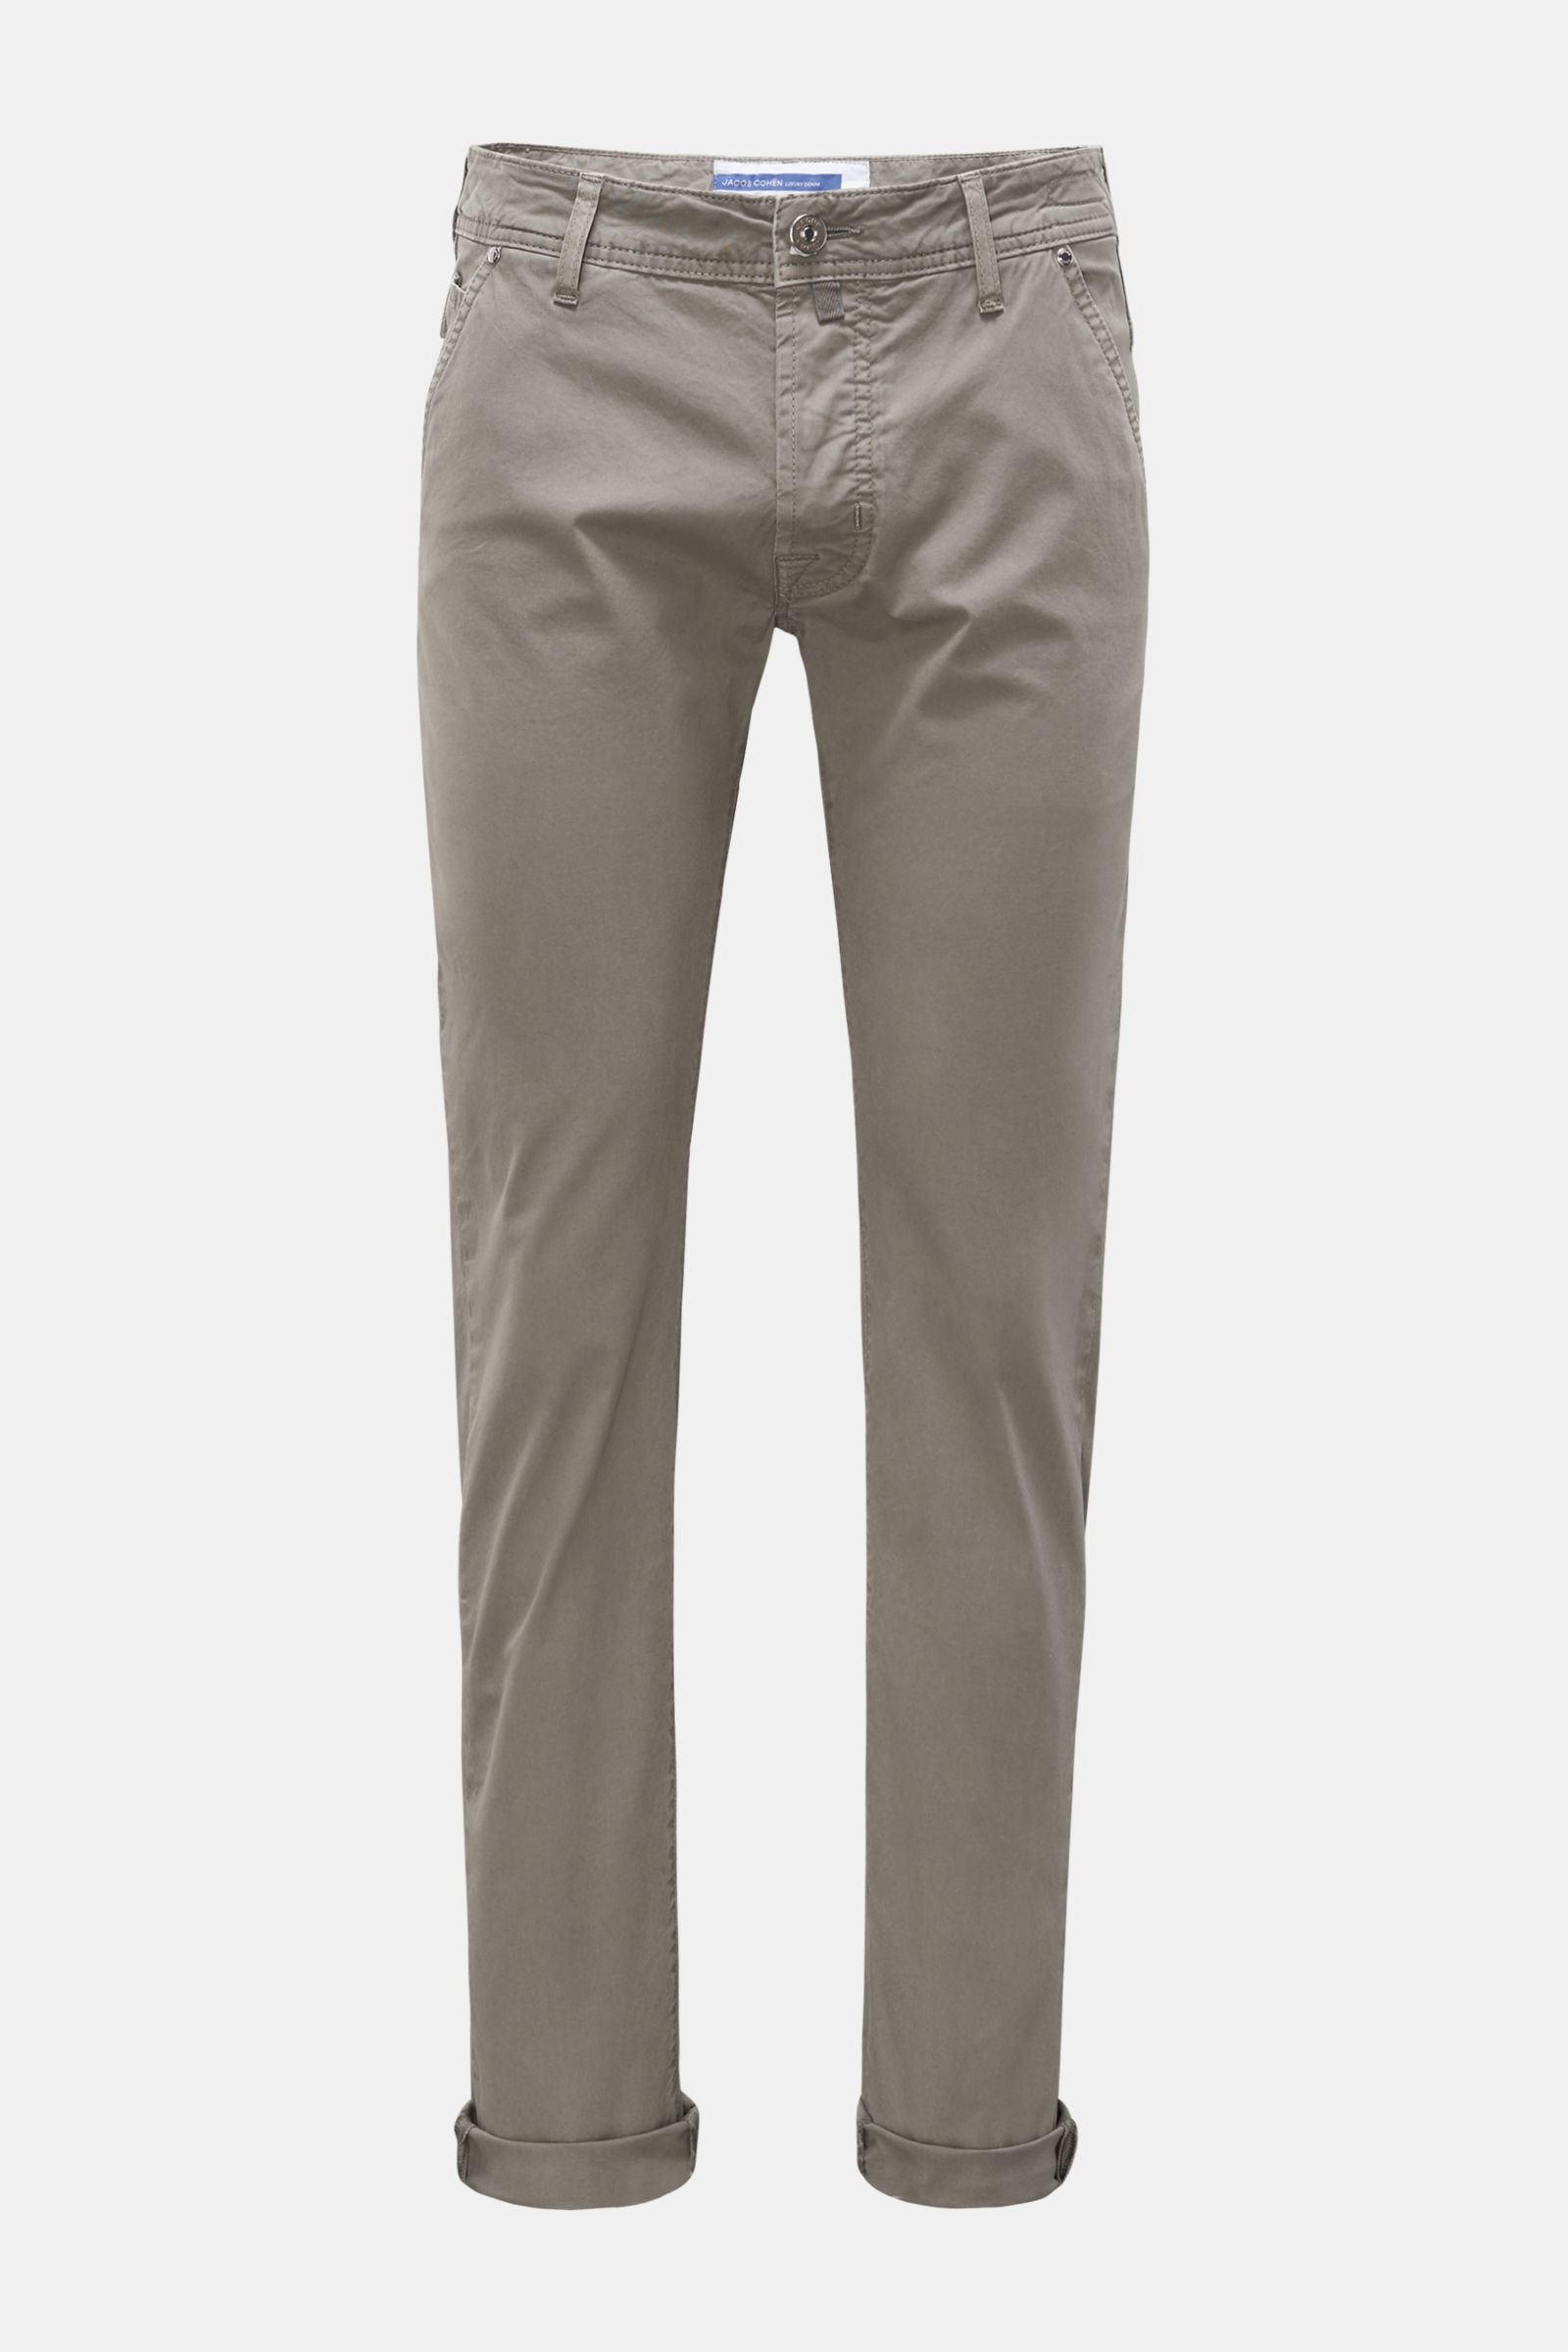 Cotton trousers 'Leonard' grey-brown (formerly J613)